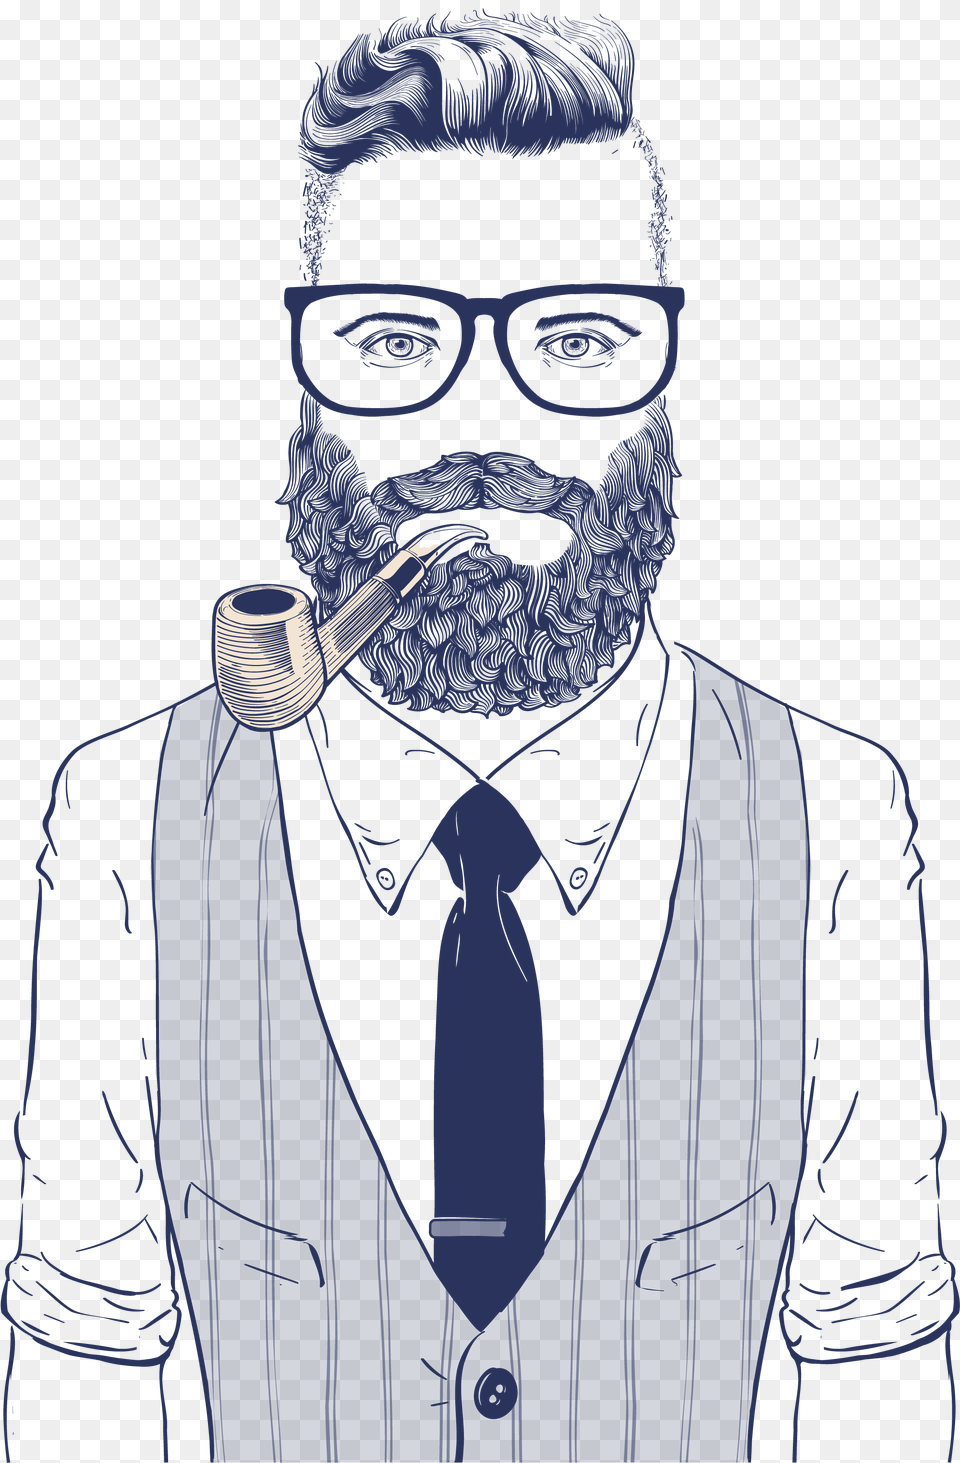 Wearing Style Sunglasses Illustration Vector Hipster Retro Hipster, Accessories, Tie, Formal Wear, Adult Png Image